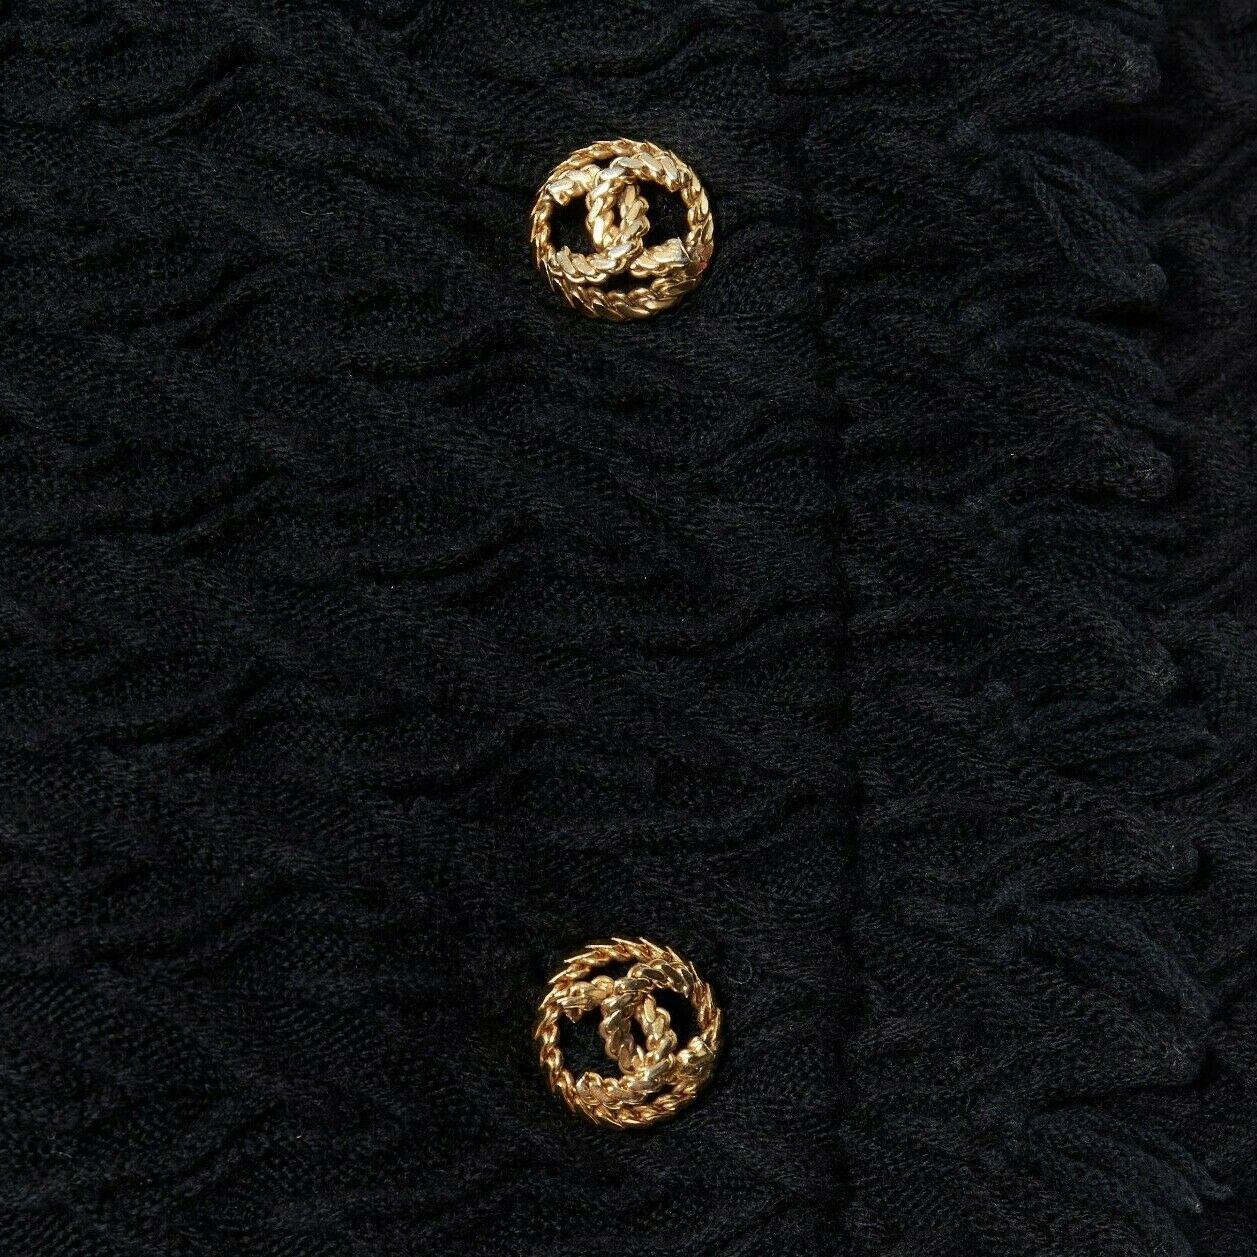 CHANEL HAUTE COUTURE chevron knit gold button high neck fray little black jacket
Brand: CHANEL
Designer: Karl Lagerfeld
Collection: Haute Couture
Model Name / Style: Couture jacket
Material: Other; composition label not present. Feels like